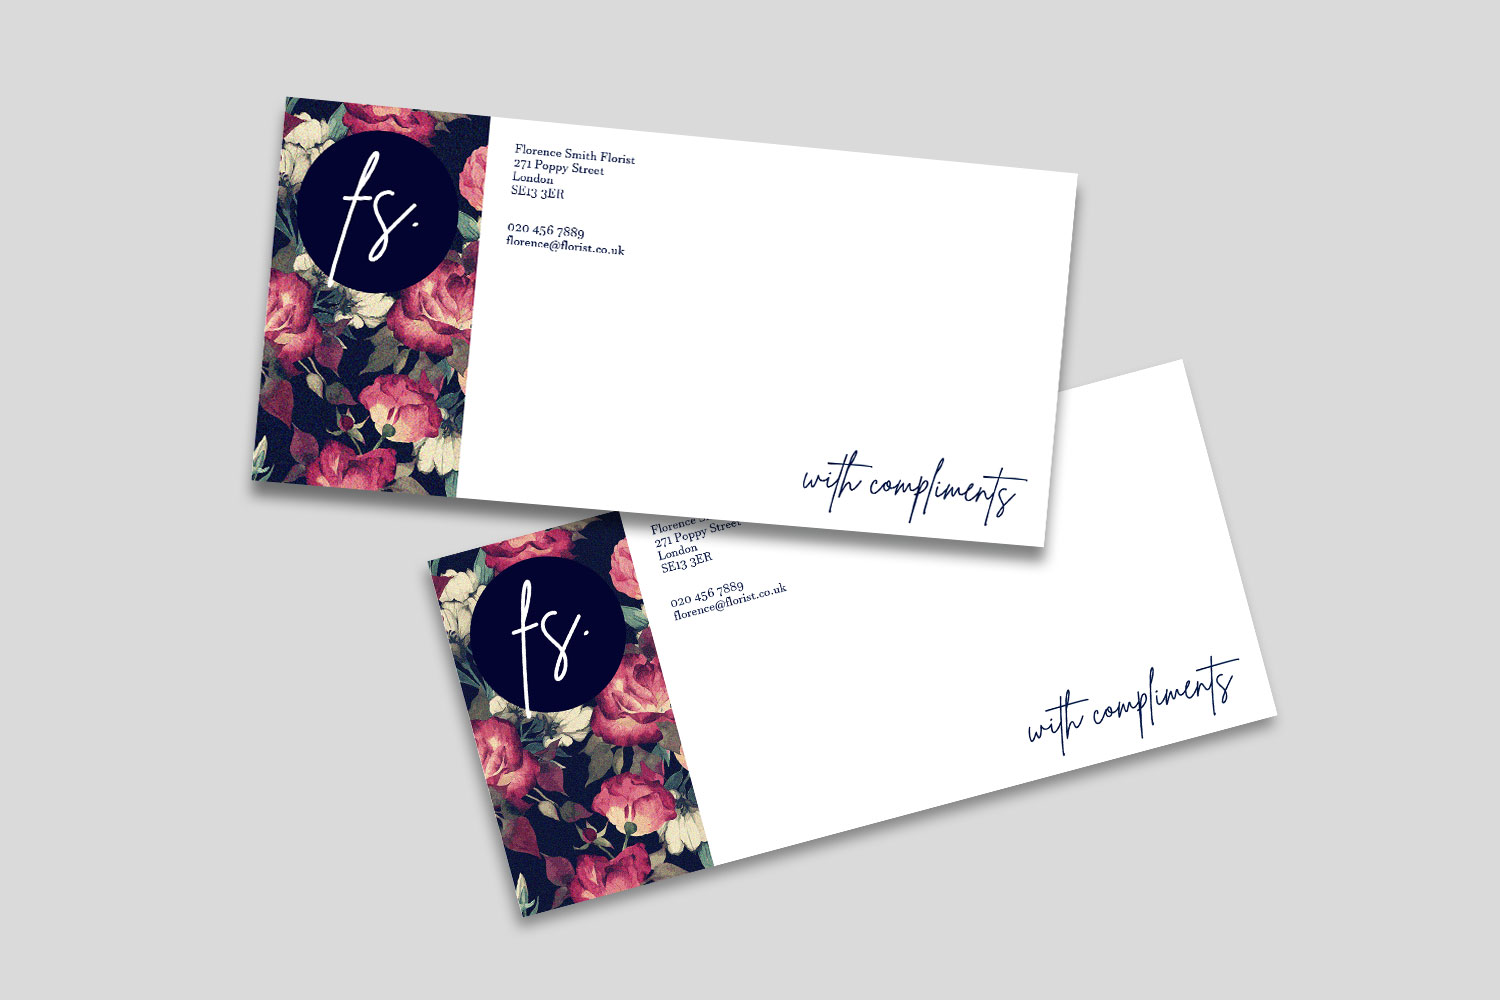 Letterheads, Compliment Slips, and Business Cards, printing in London & the UK, Same Day Business Stationery